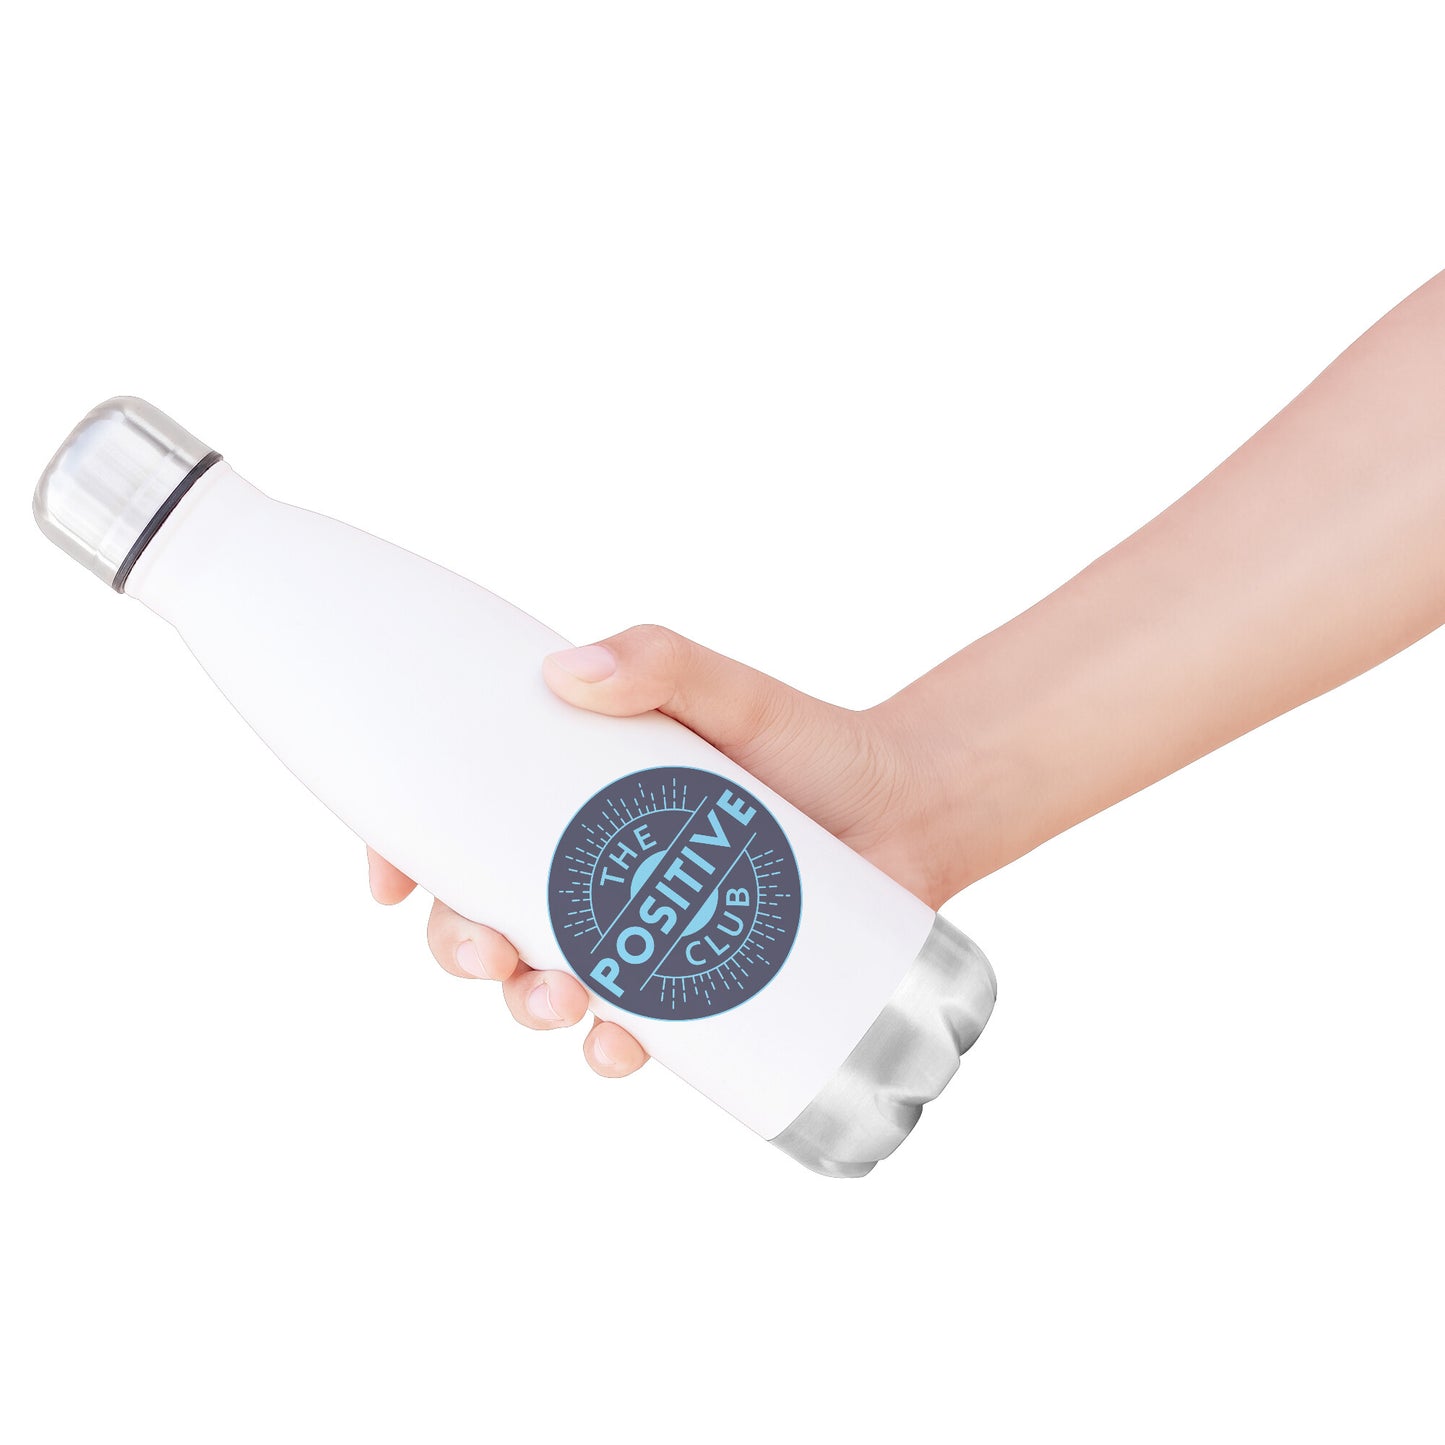 20oz Insulated Water Bottle The Positive Club ( Free Shipping )